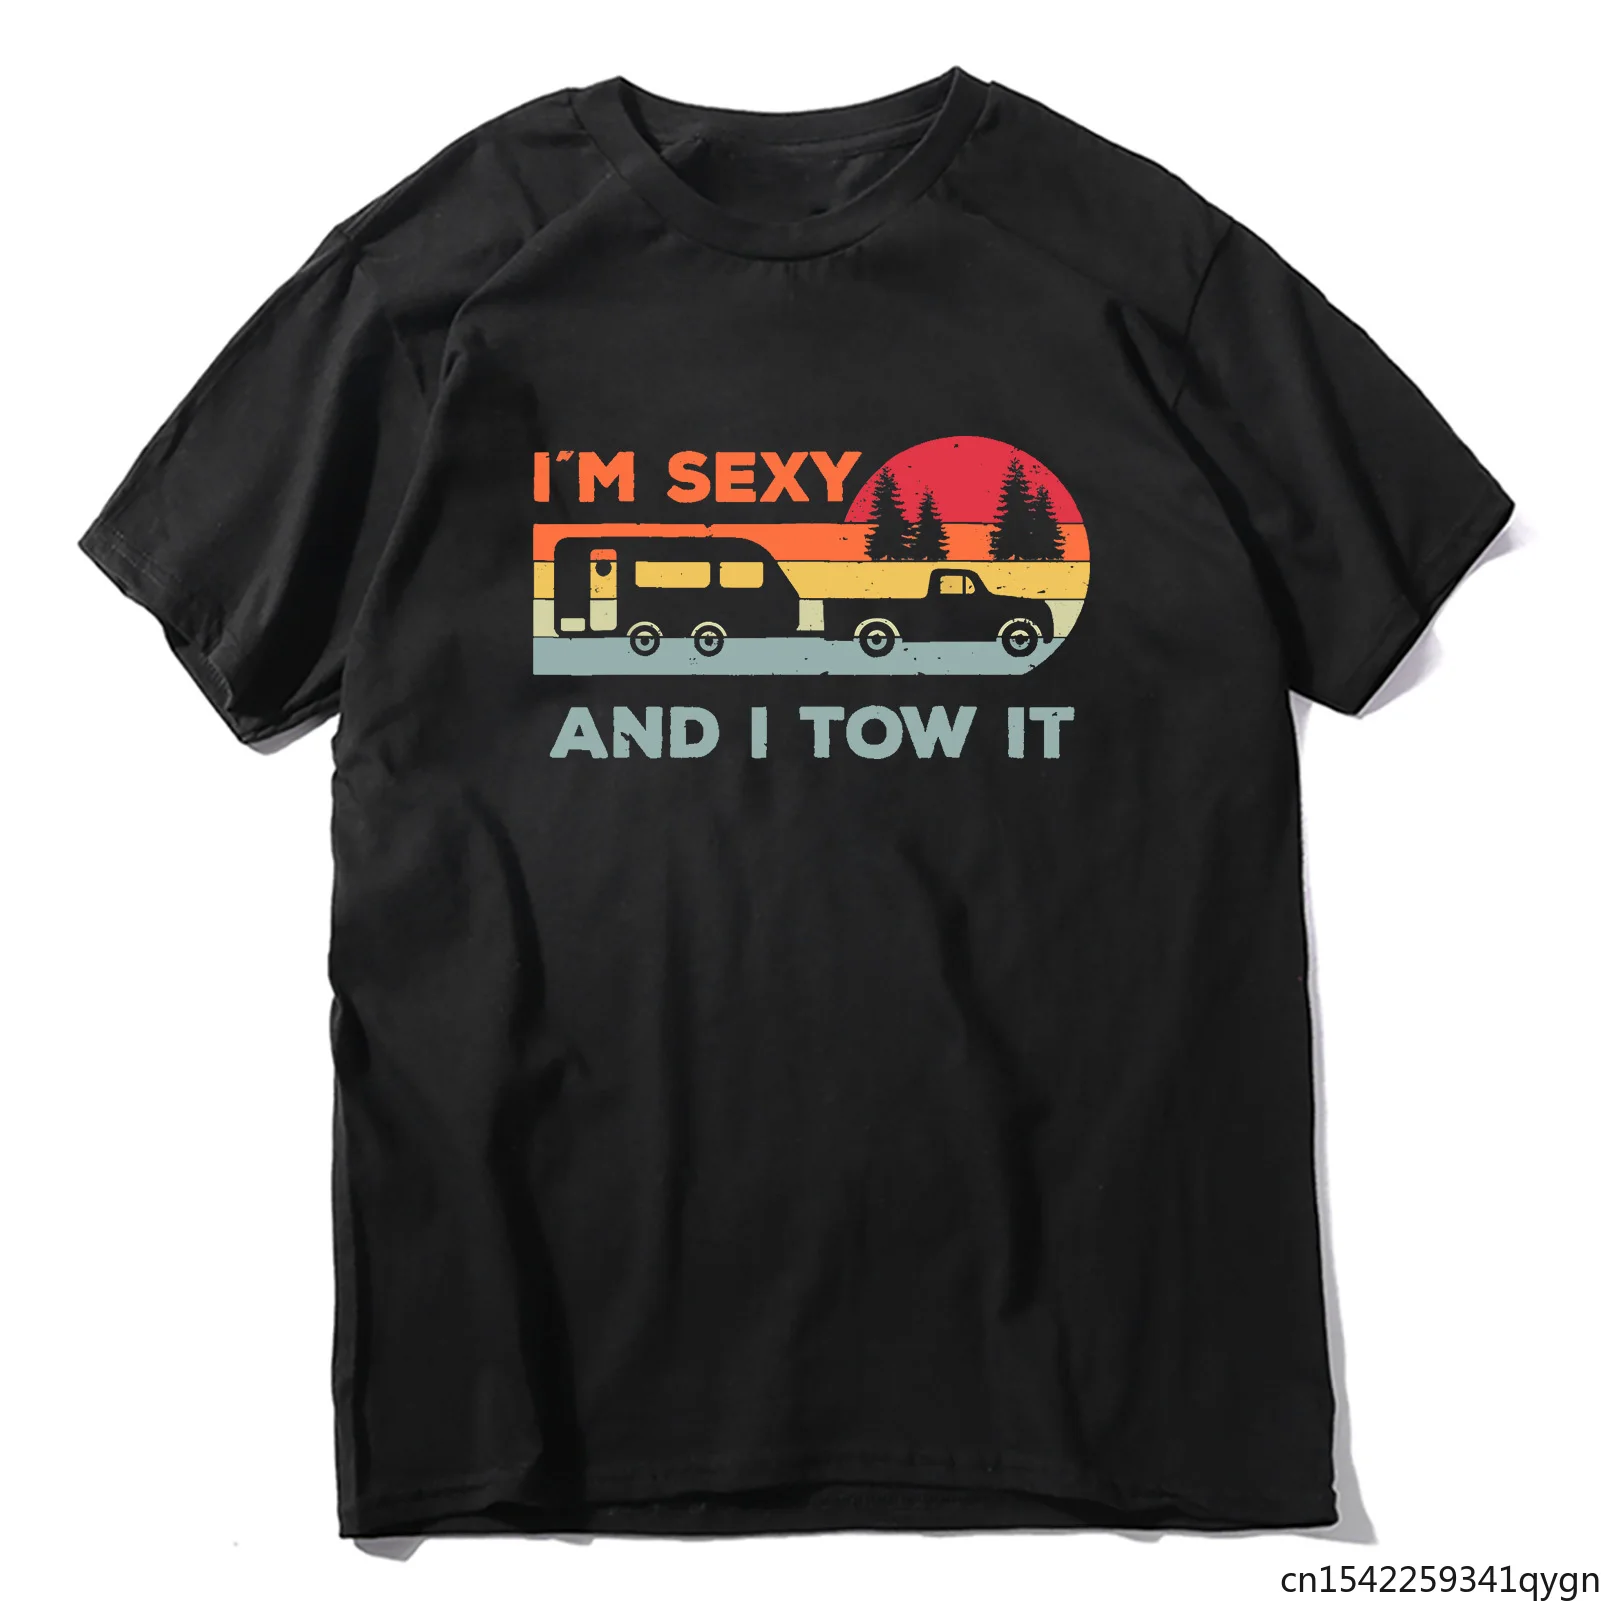 

I'm Sexy and I Tow It RV Camper Funny Camping Lovers Funny Men's Shirt Short Sleeve Funny Unisex T-Shirt Comfortable Tee